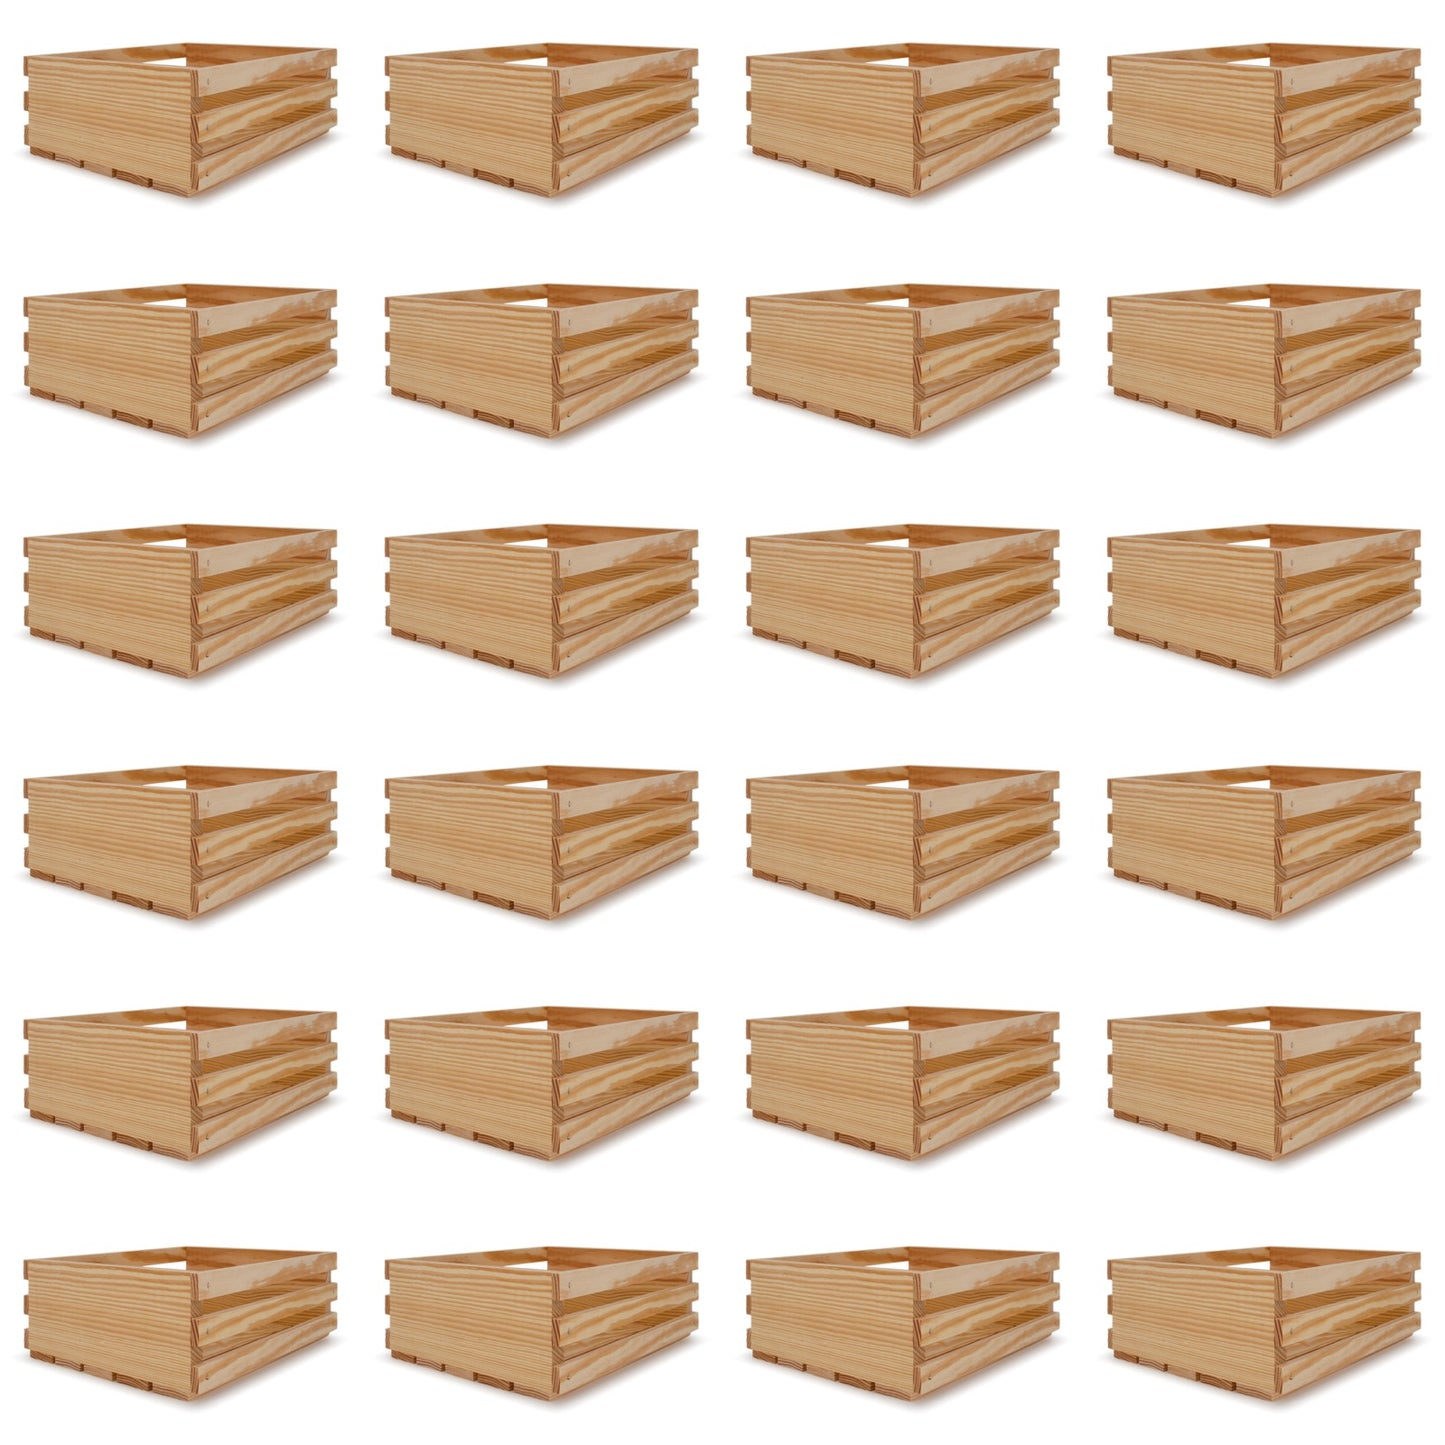 24 Small wooden crates 12x10x4.5